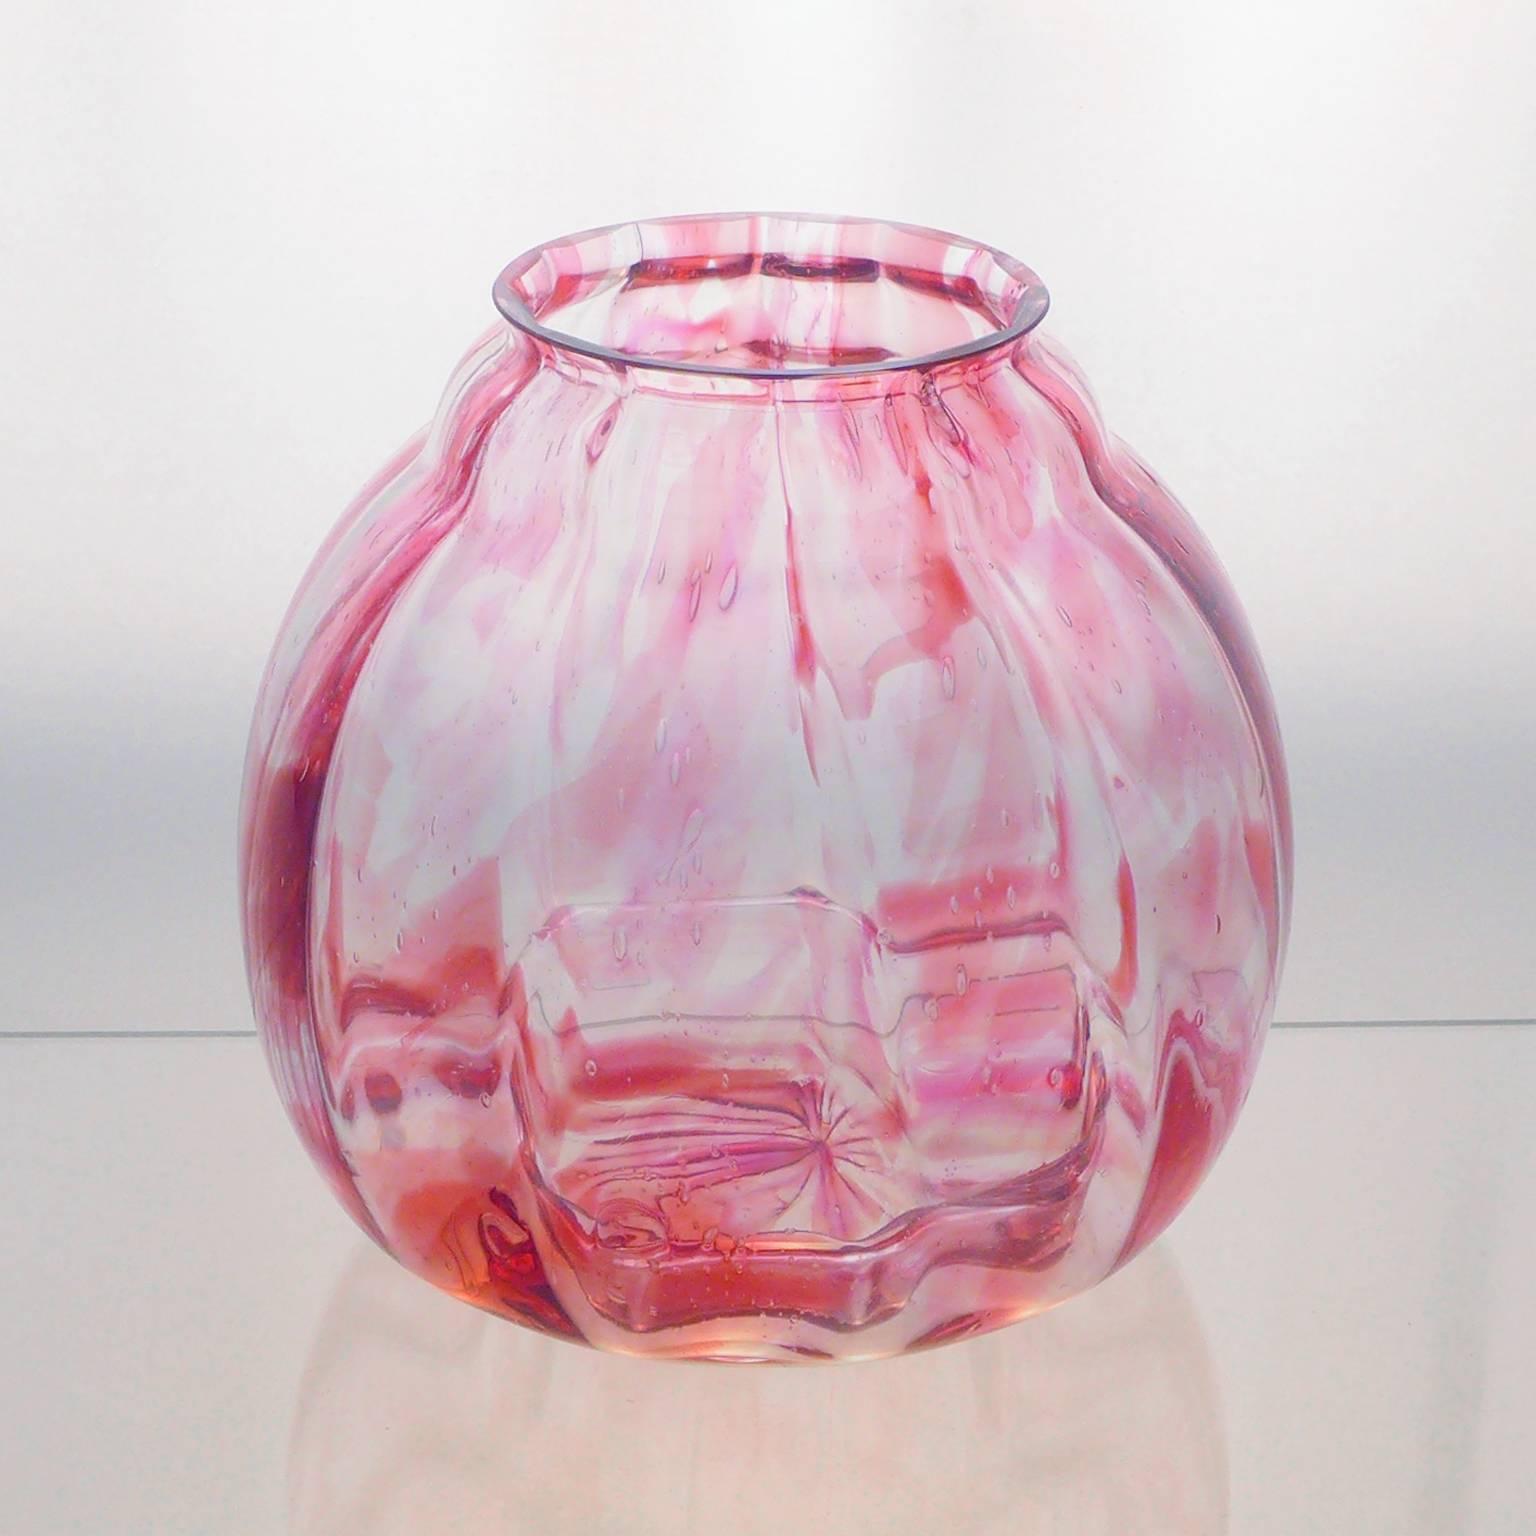 Wonderfully marbled Art Deco 'Flora' vase produced by Leerdam Glassworks. Designed by A. D. Copier, circa 1923. Andries Dirk Copier is one of the most revered glass designers of his time a leader in the Art Deco 'Amsterdam School' style. Leerdam